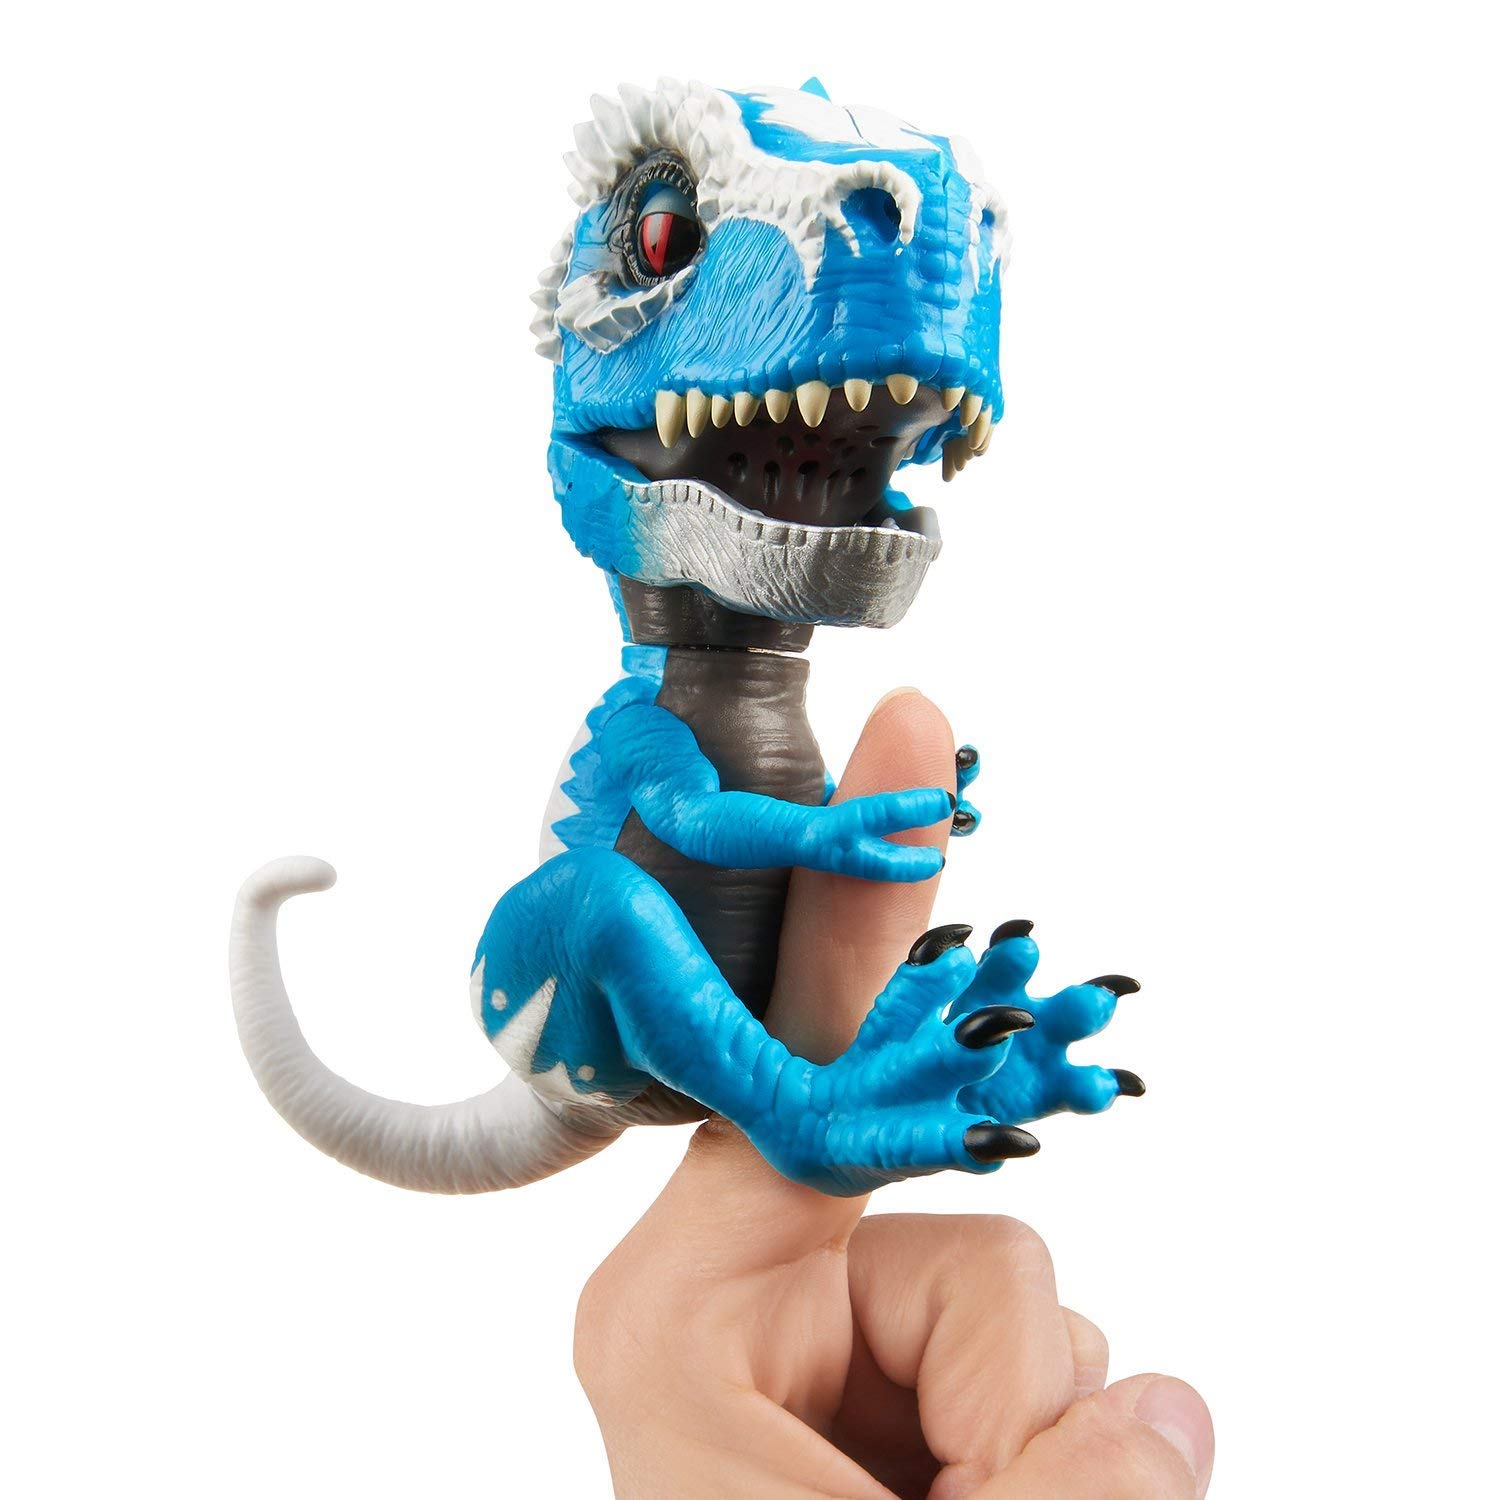 Electronic T-Rex Wraps On Finger Ironjaw (Blue) with 40+ Sounds - I React to Your Touch, I Chomp & Growl, I'm Alive Moving Head & Eyes, Learn How to Tame Me Or Get Chomped, Age 5+ New